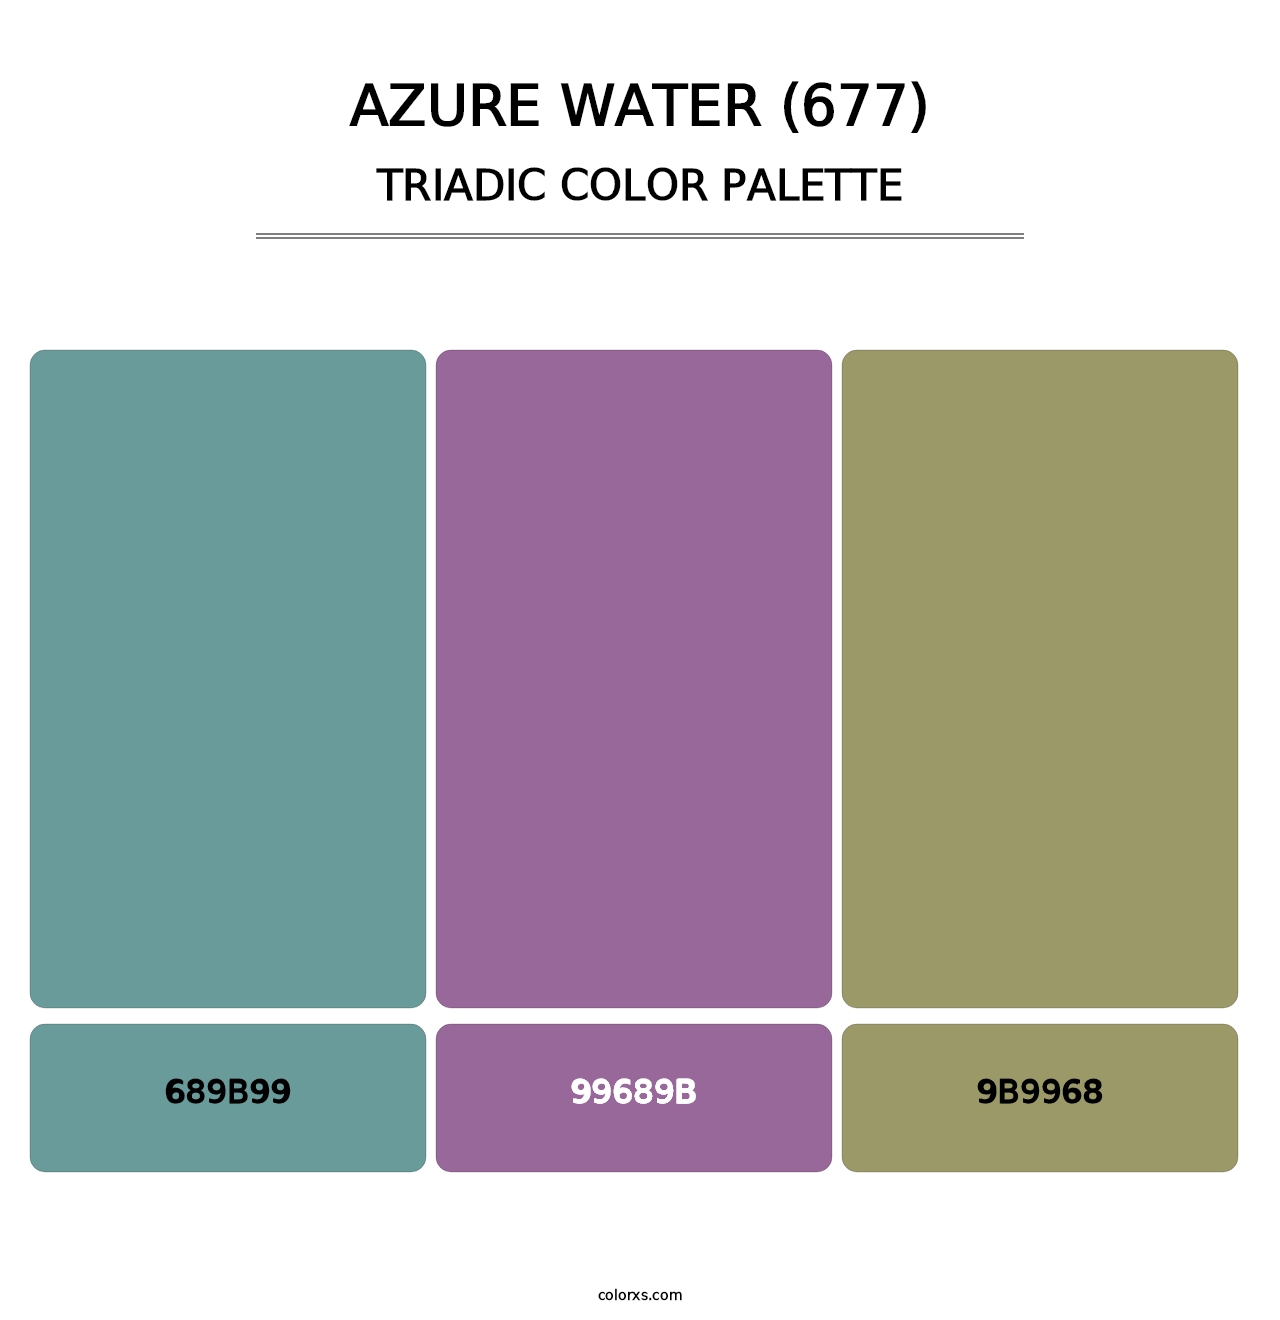 Azure Water (677) - Triadic Color Palette